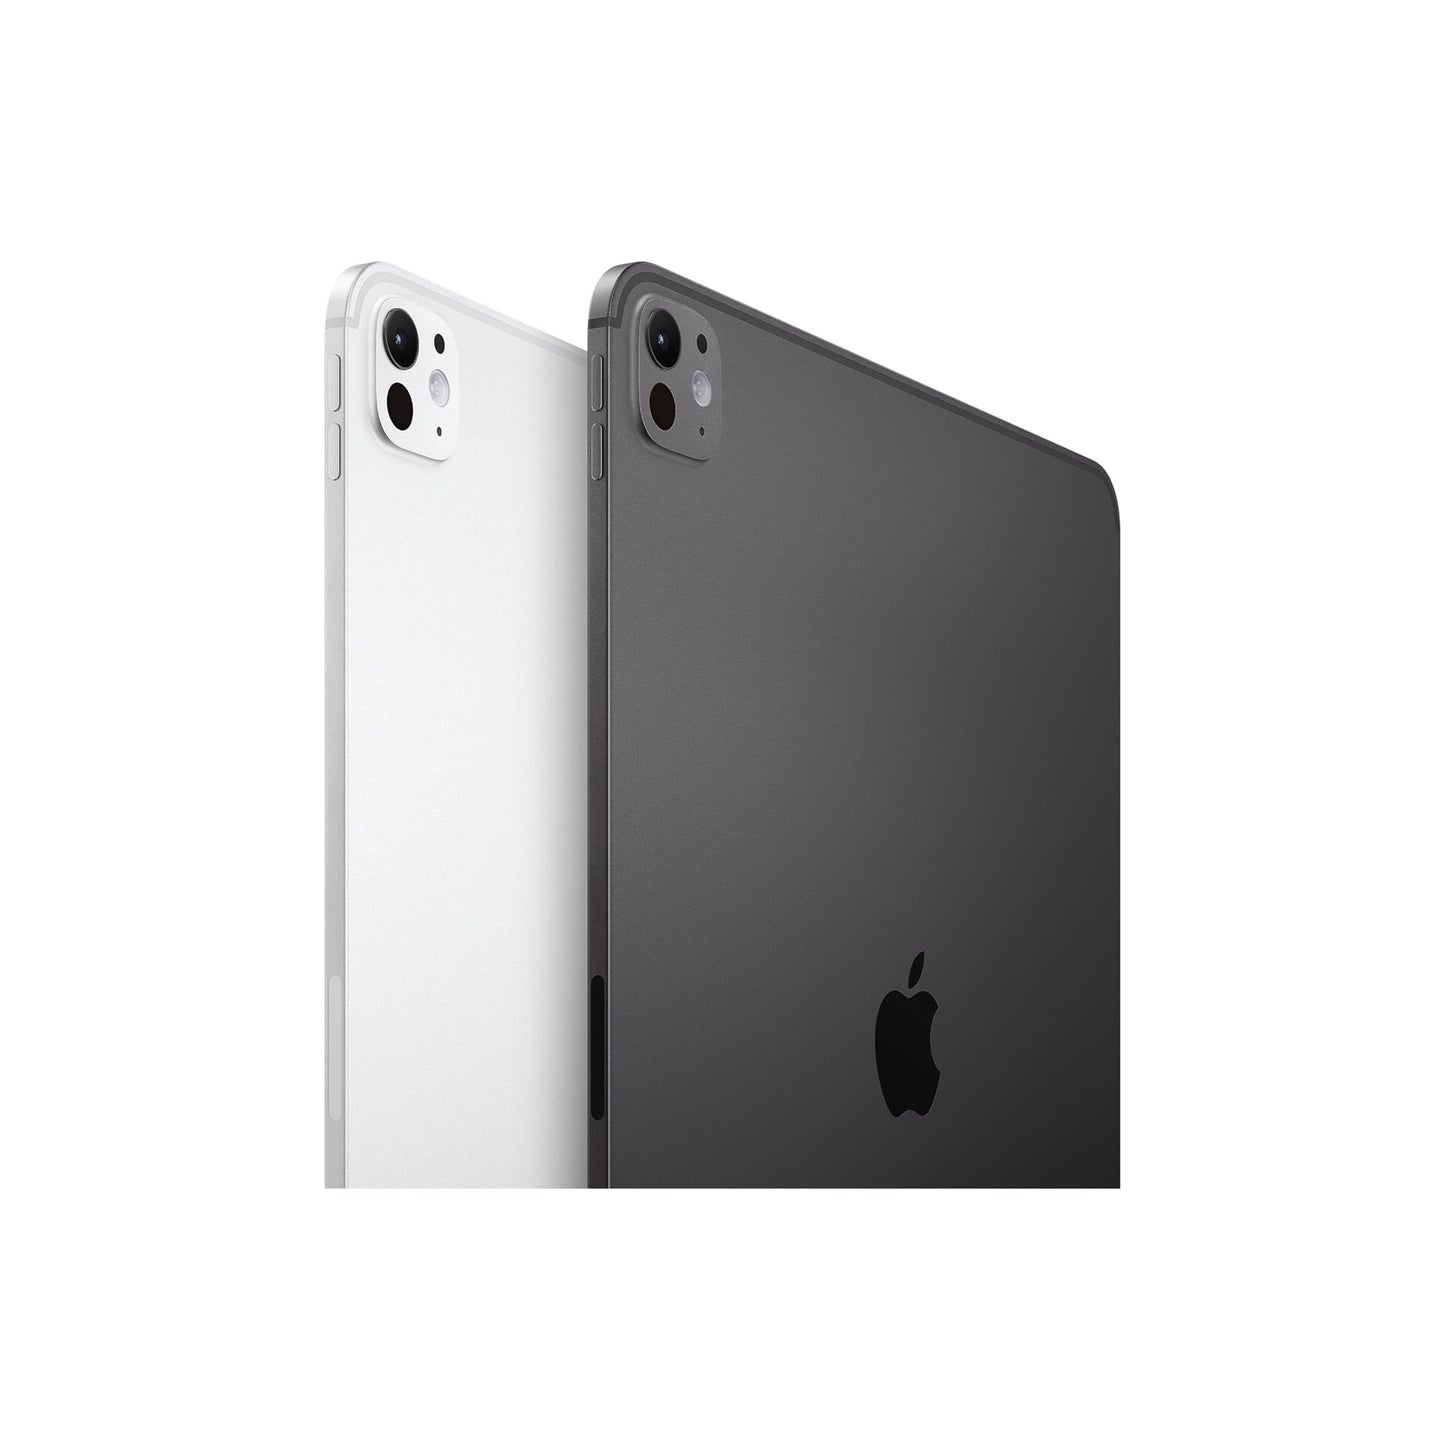 Apple iPad Pro 11-Inch (M4): Ultra Retina XDR Display, 2TB, Landscape 12MP Front Camera/12MP Back Camera, LiDAR Scanner, Wi-Fi 6E + 5G Cellular with eSIM, Face ID, All-Day Battery Life — Space Black